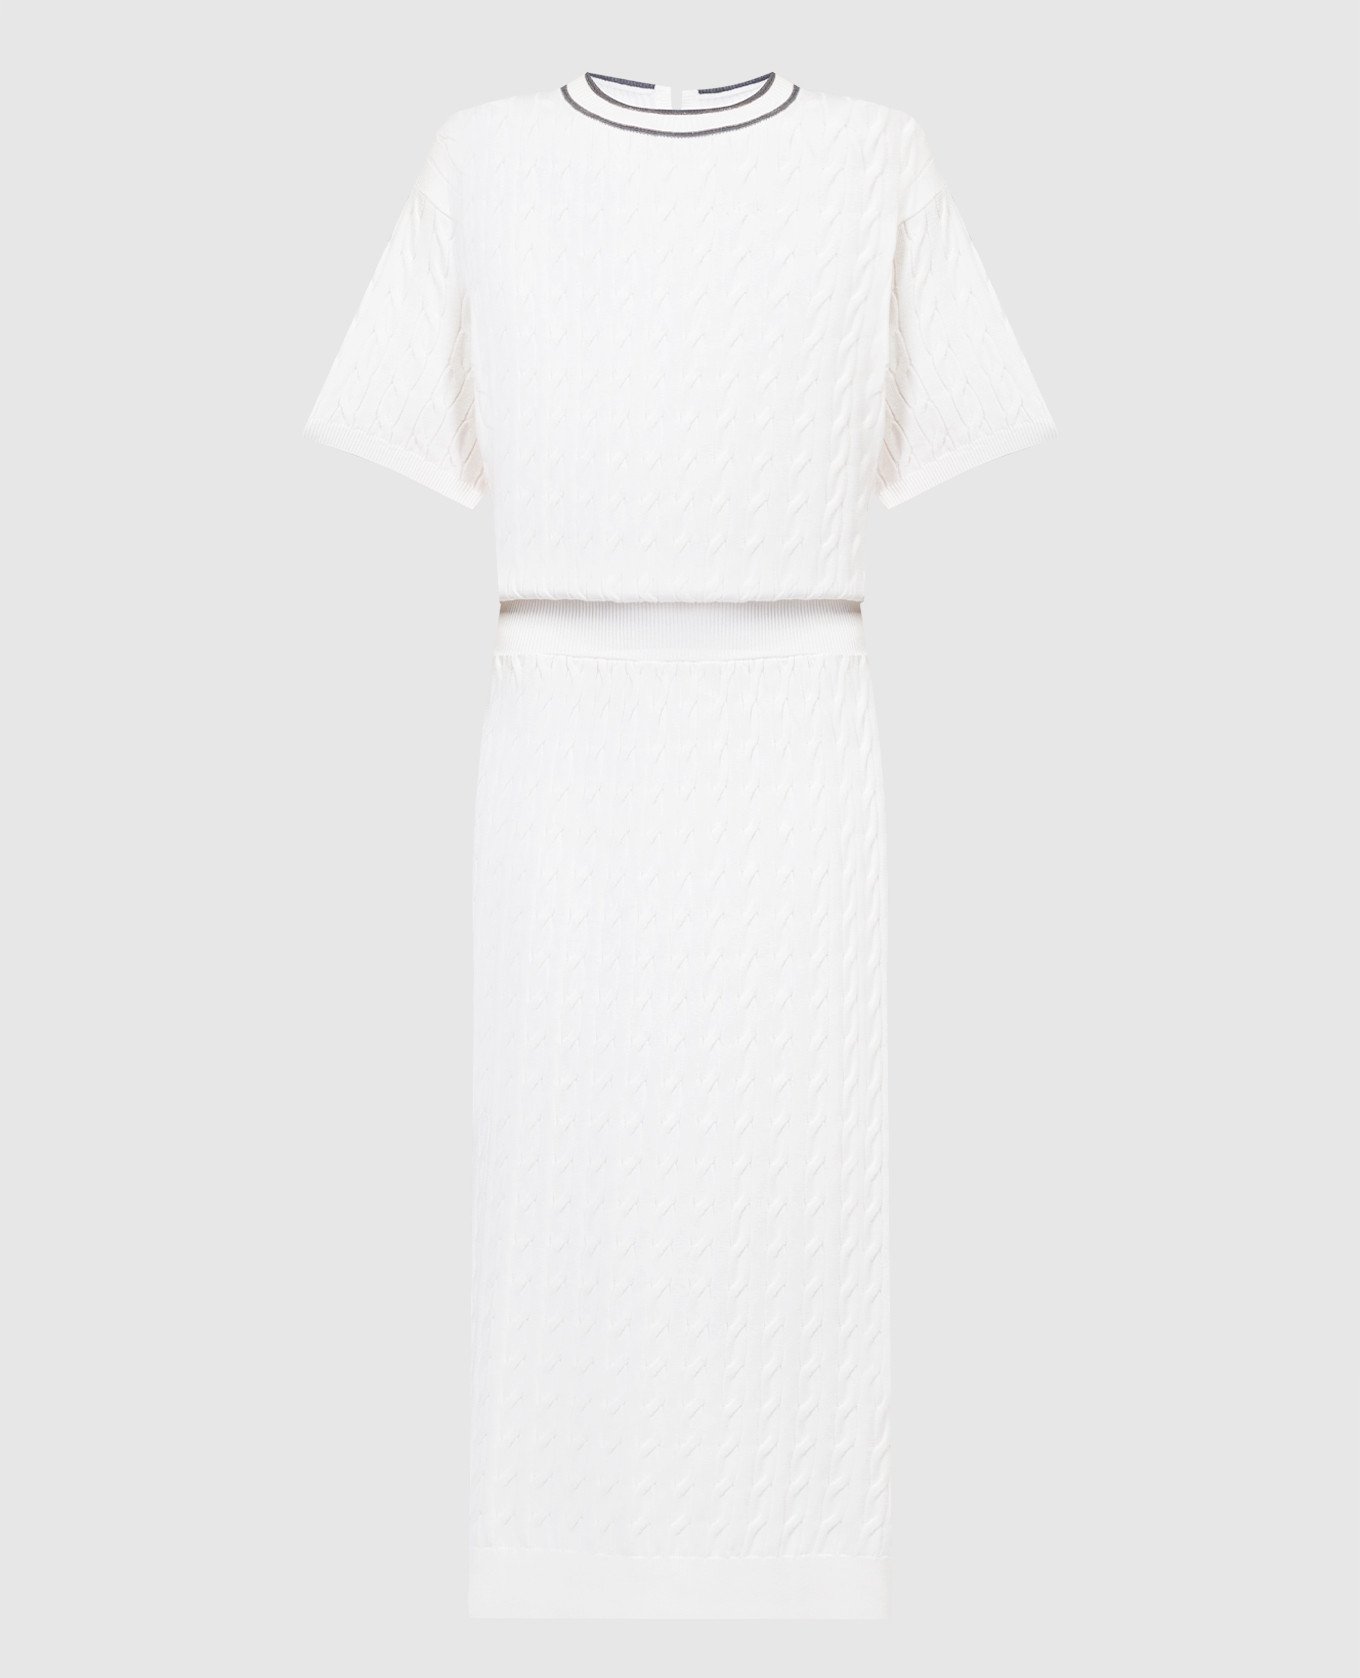 White dress in a textured pattern with a monil chain